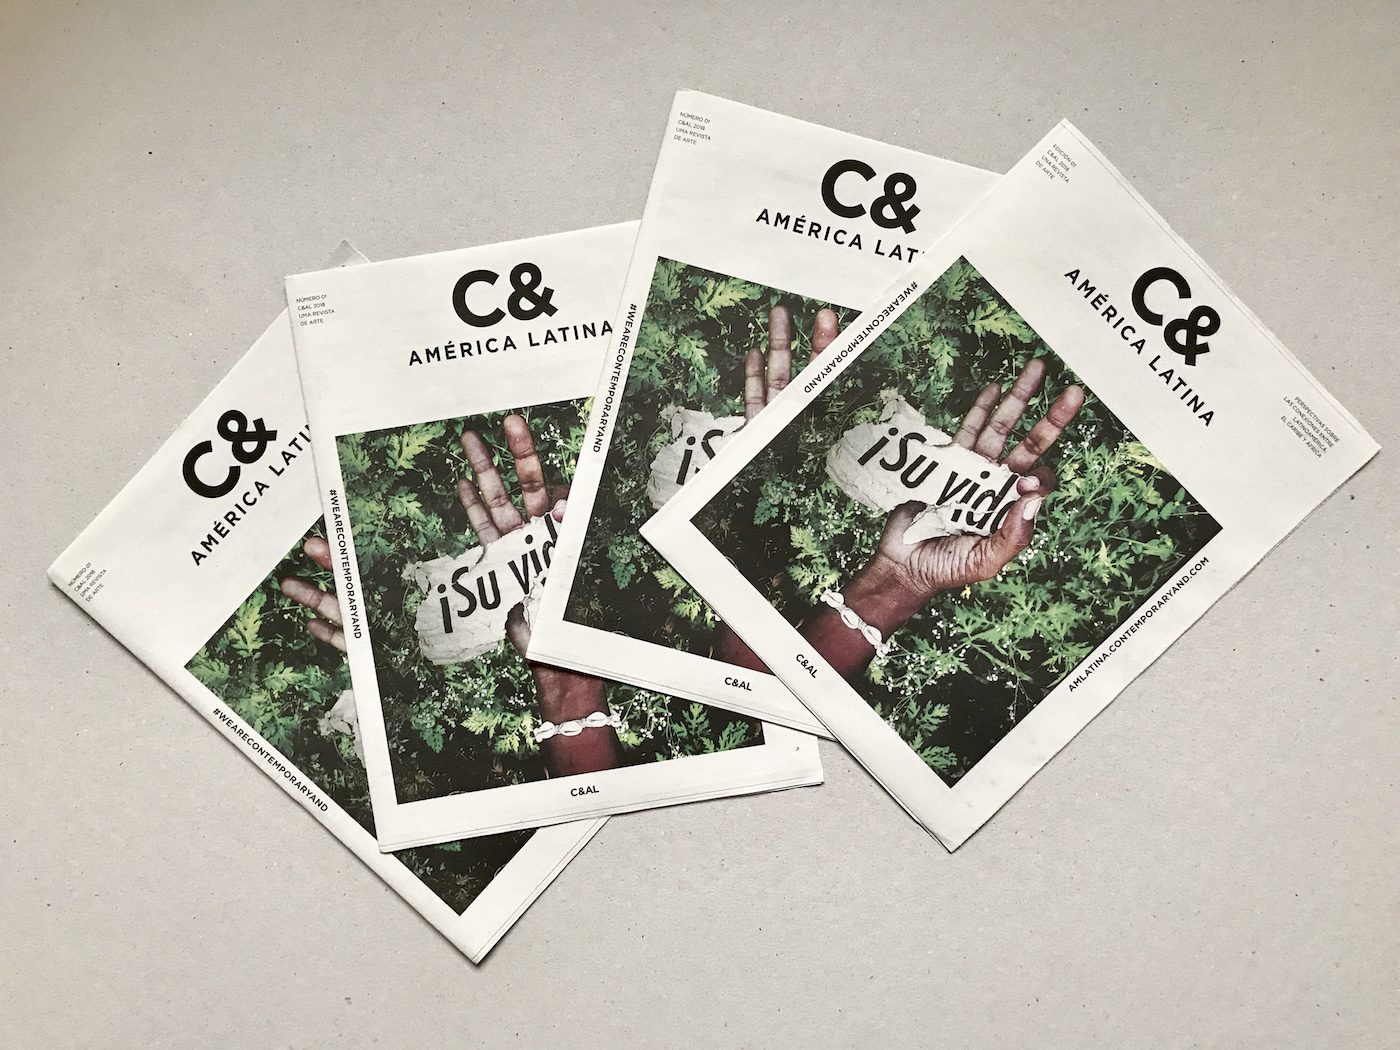 The first C&AL print issue - launched on 26 October 2018 in Bogotá, Colombia. 